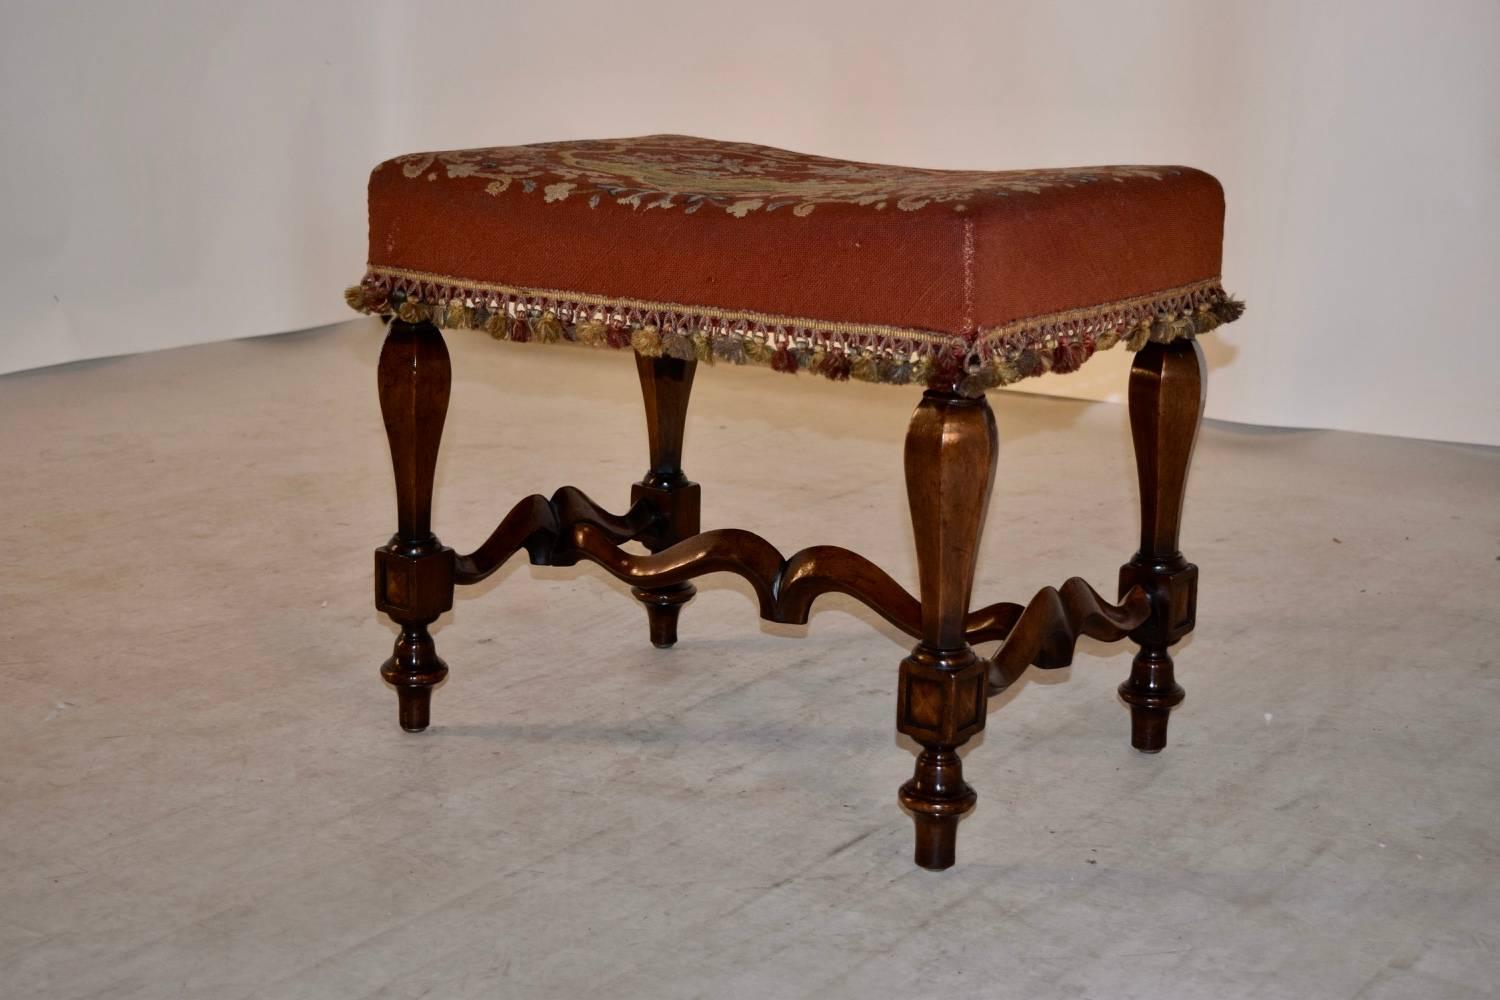 19th century French stool made from mahogany with a needlepoint upholstered seat, which is worn from age and use and has a tassel fringe trim. The legs are hand-turned and are joined by shaped stretchers. Raised on hand-turned feet.